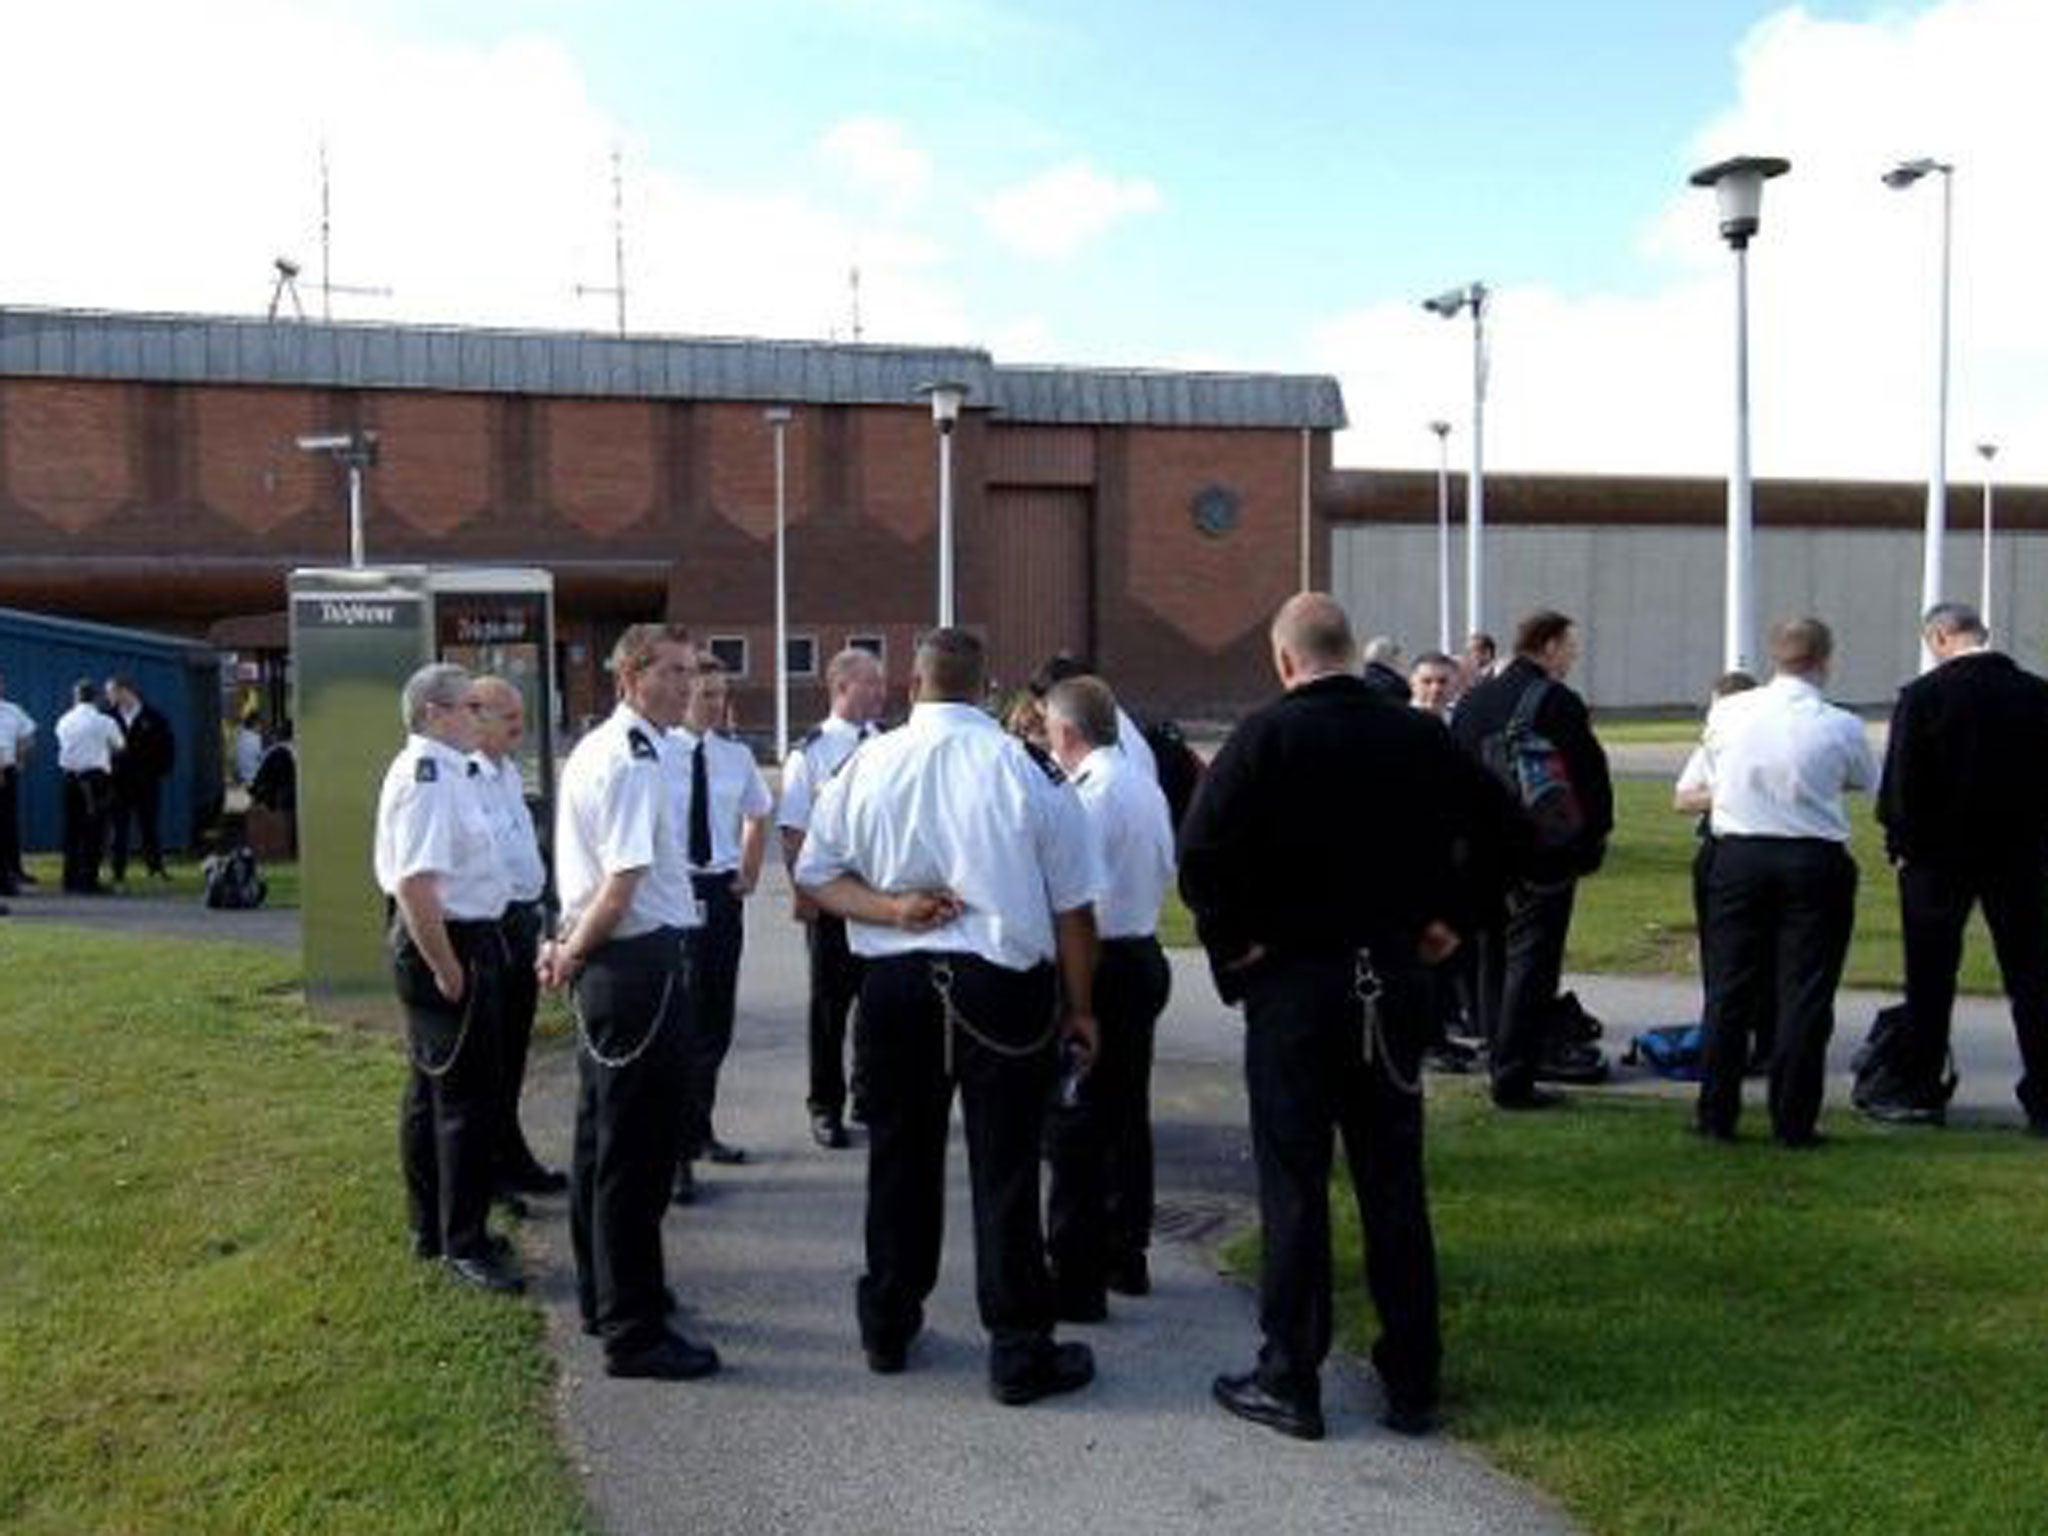 Staff outside Full Sutton prison in York where three serving prisoners, Feroz Khan, Fuad Awale and David Watson have been charged with falsely imprisoning an officer